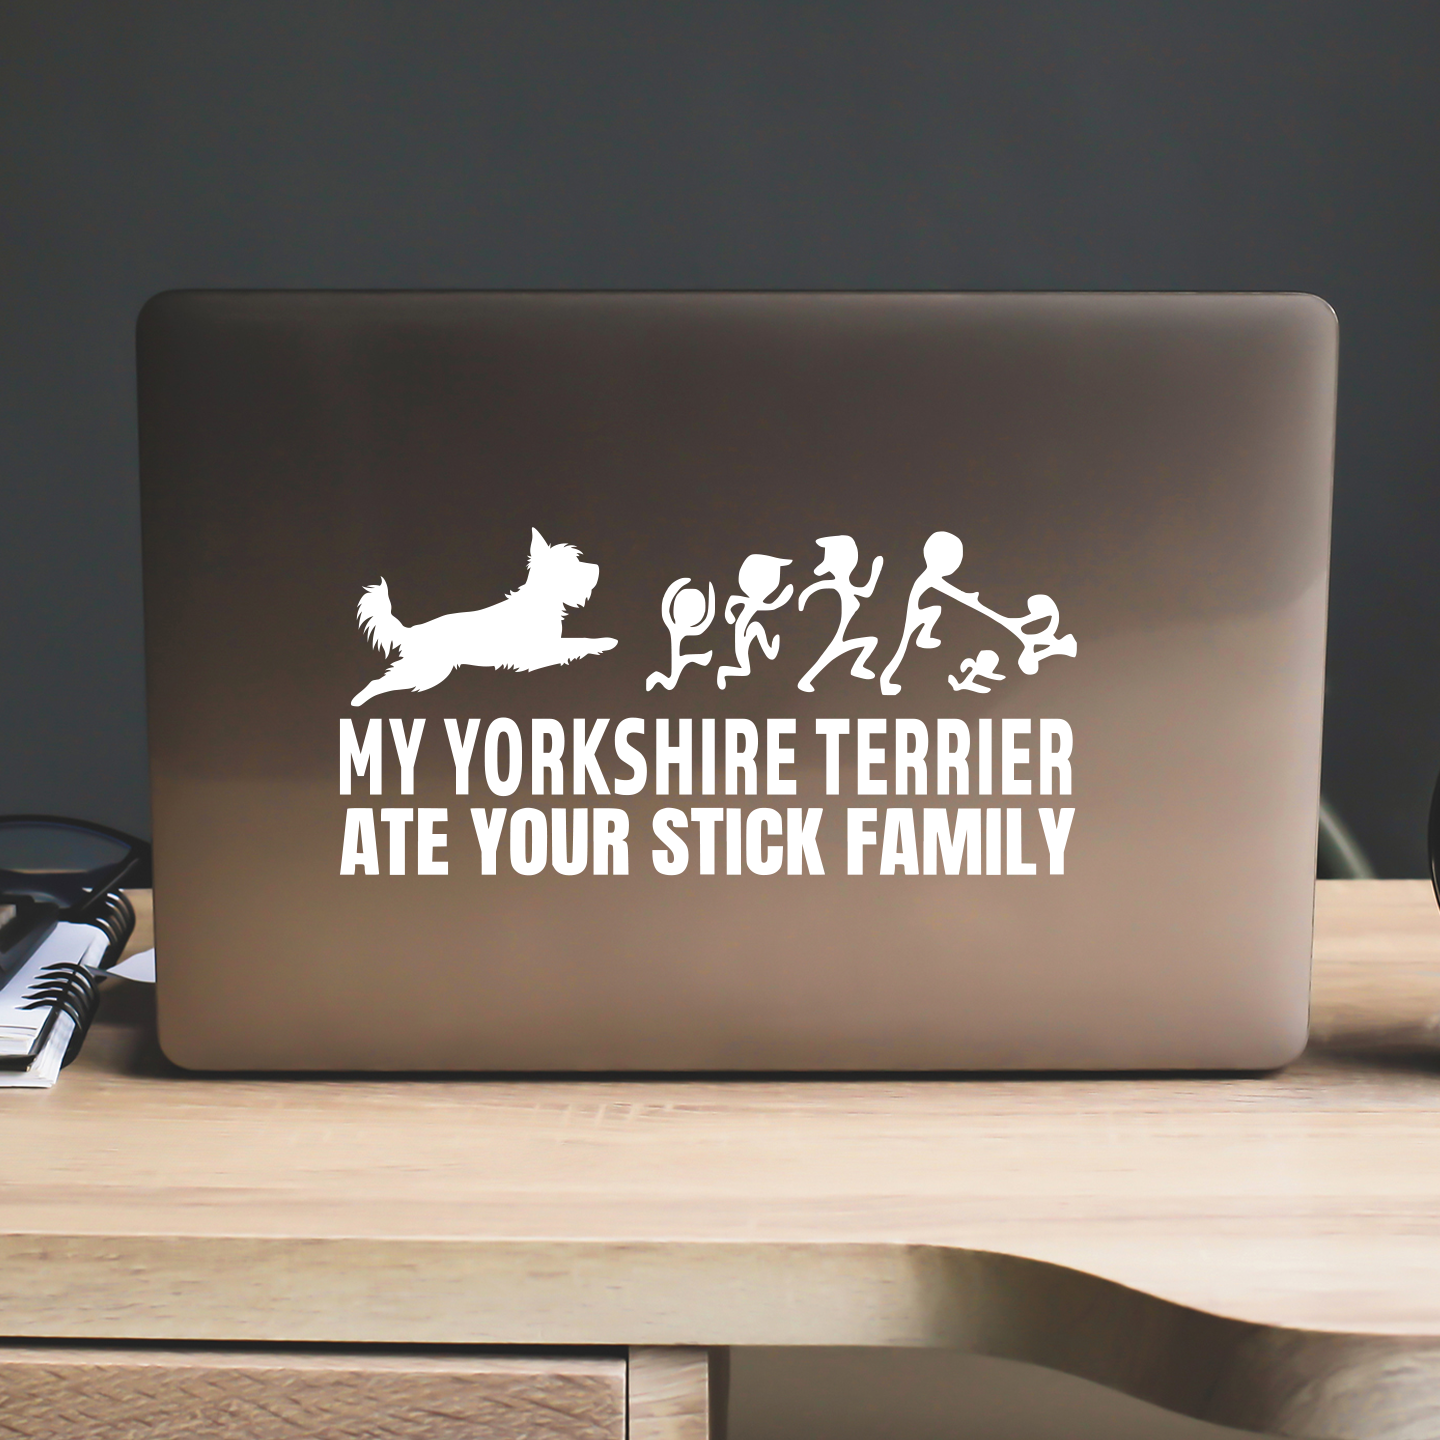 My Yorkshire Terrier Ate Your Stick Family Sticker